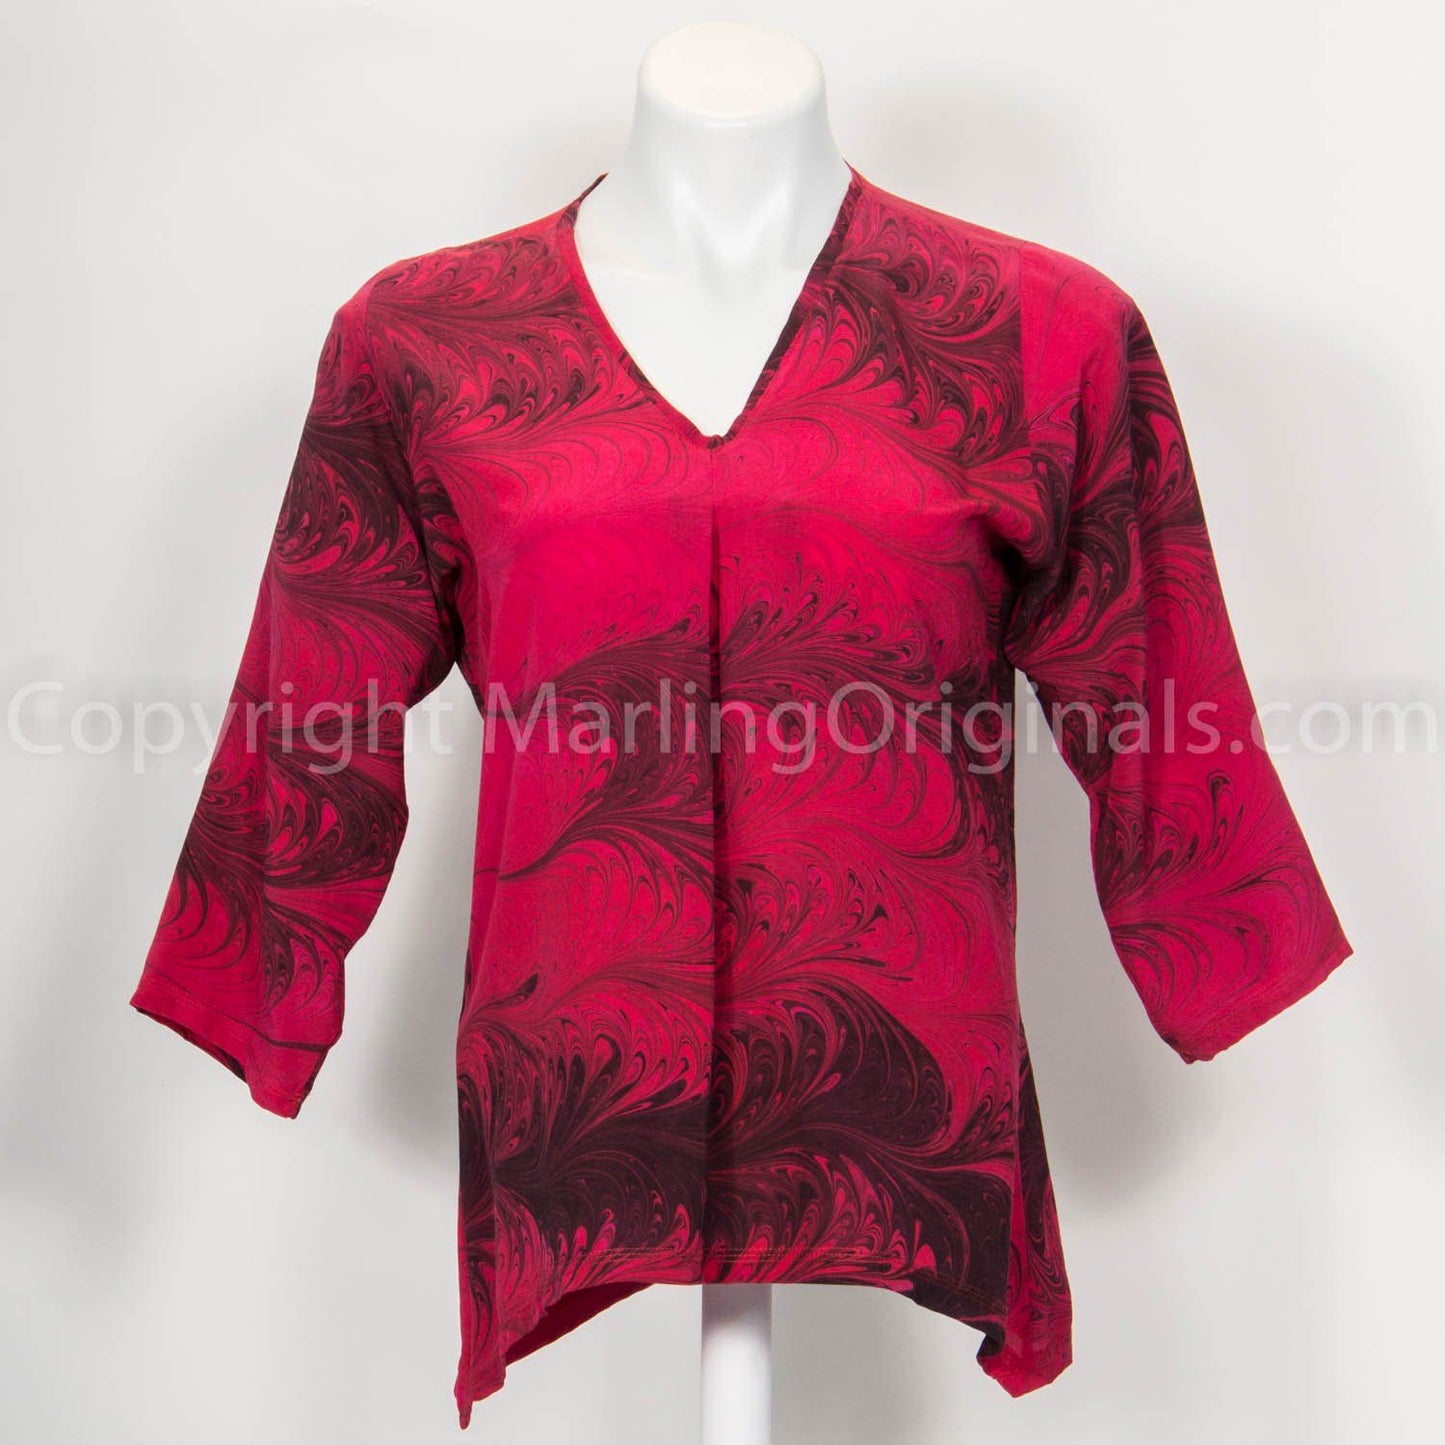 Handmarbled silk tunic for women in red and black. V neck. Long sleeves